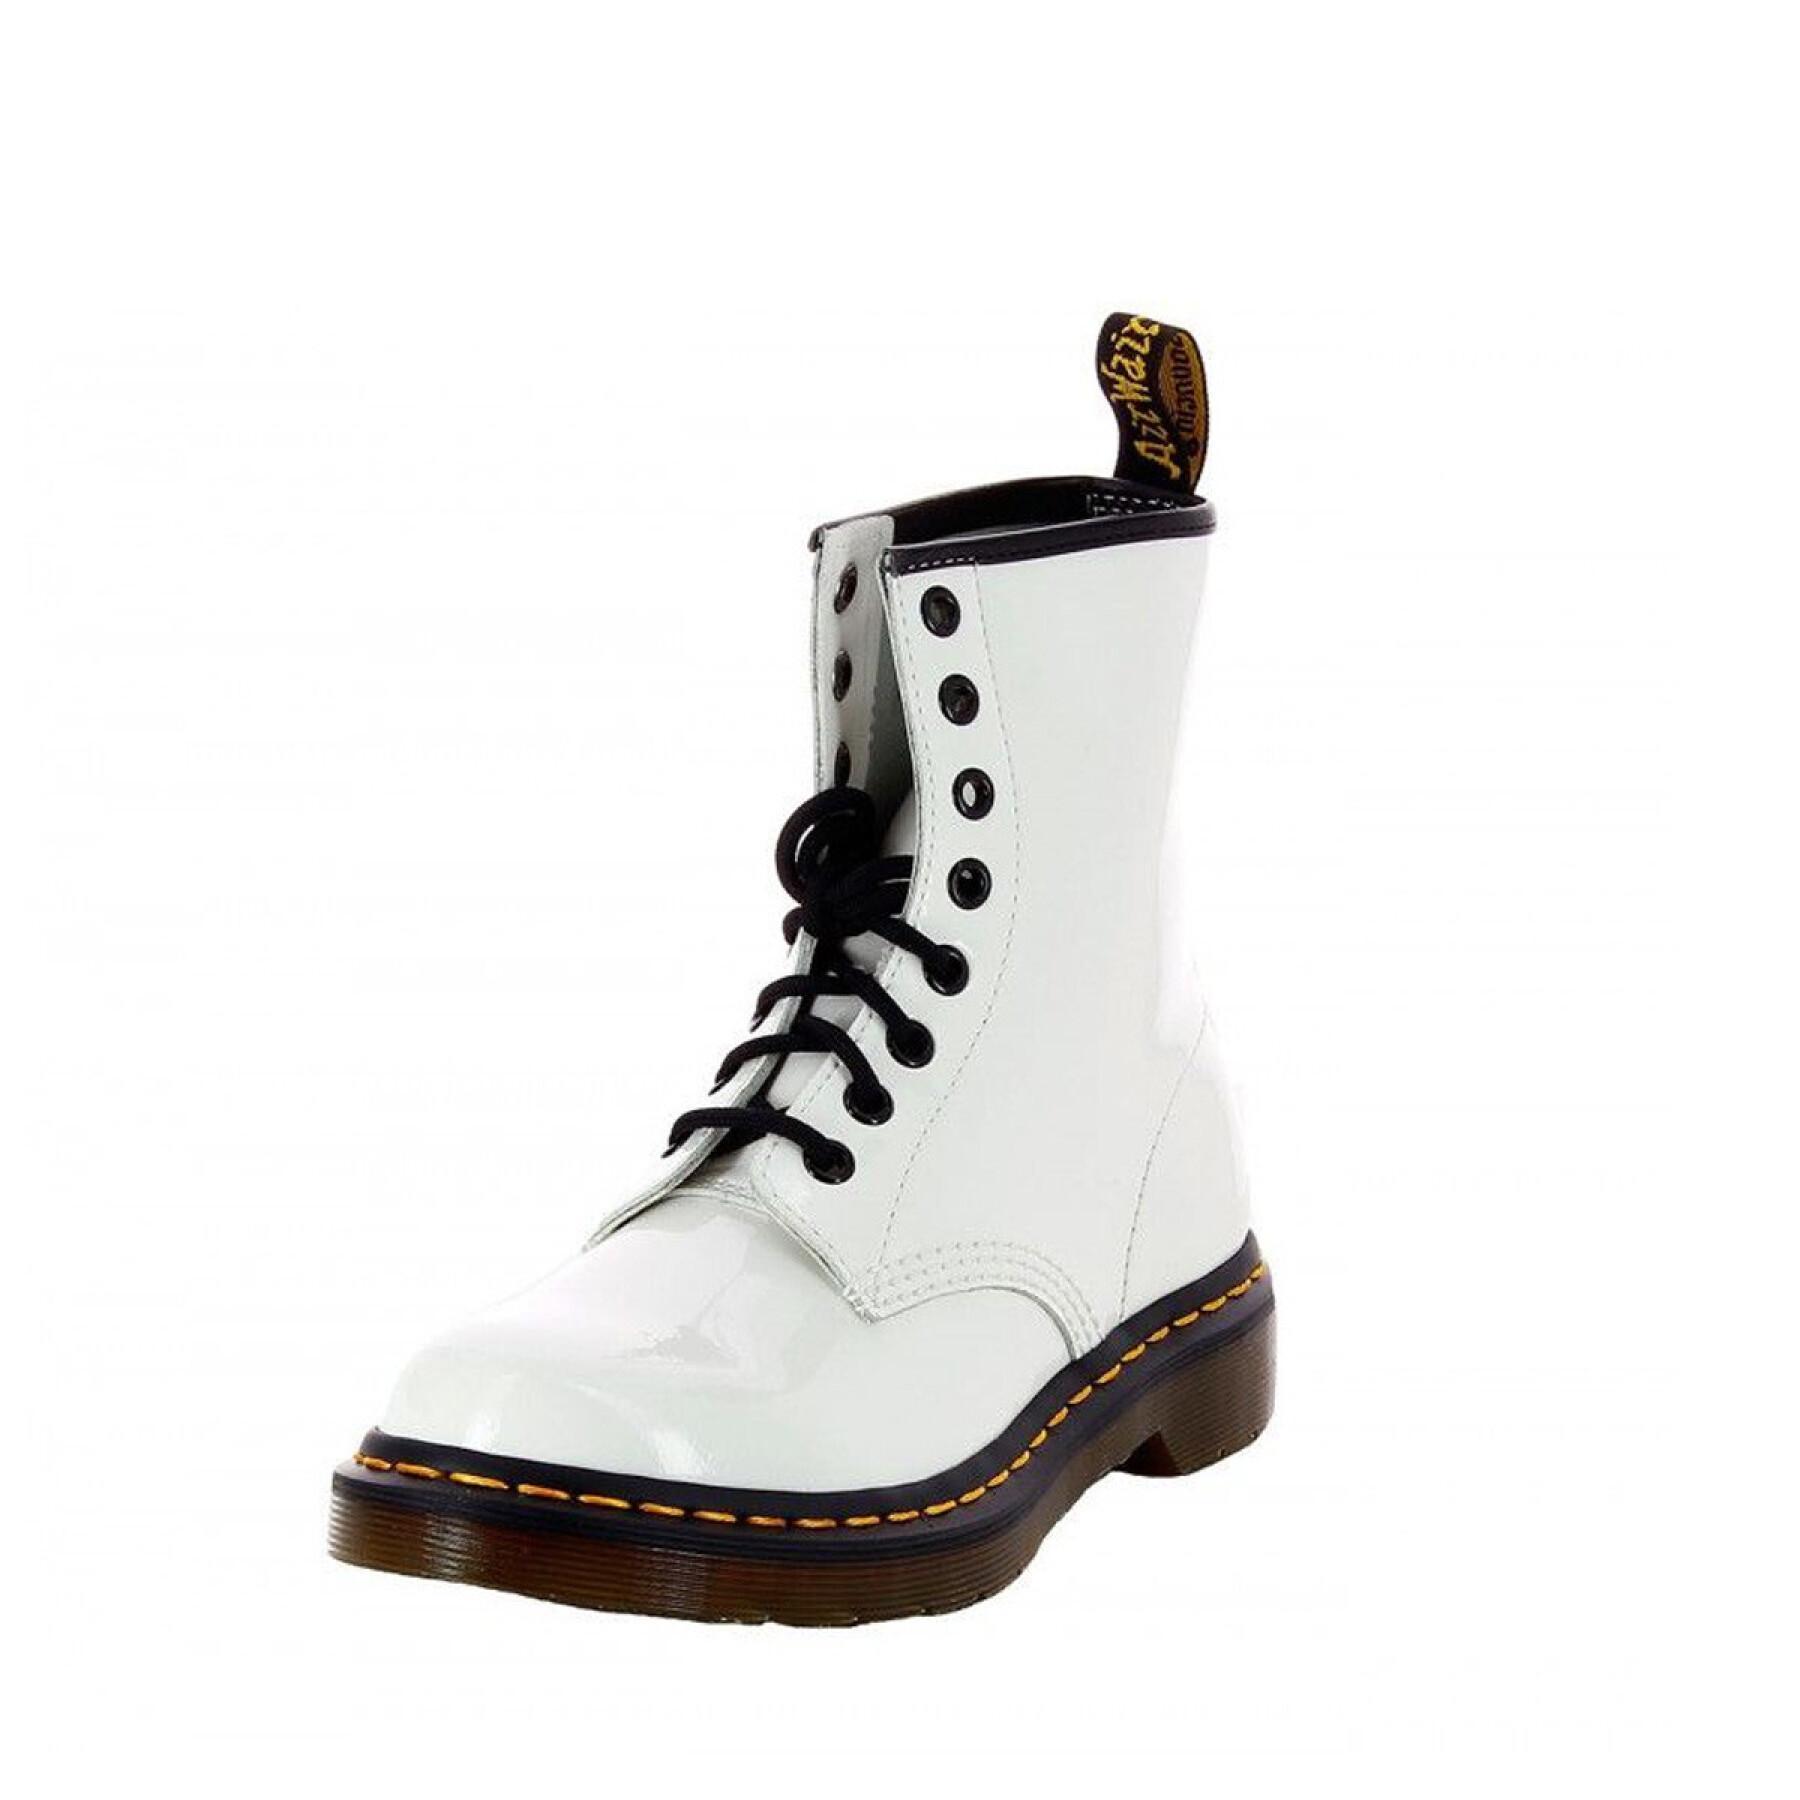 Patent leather ankle boots for women Dr Martens 1460